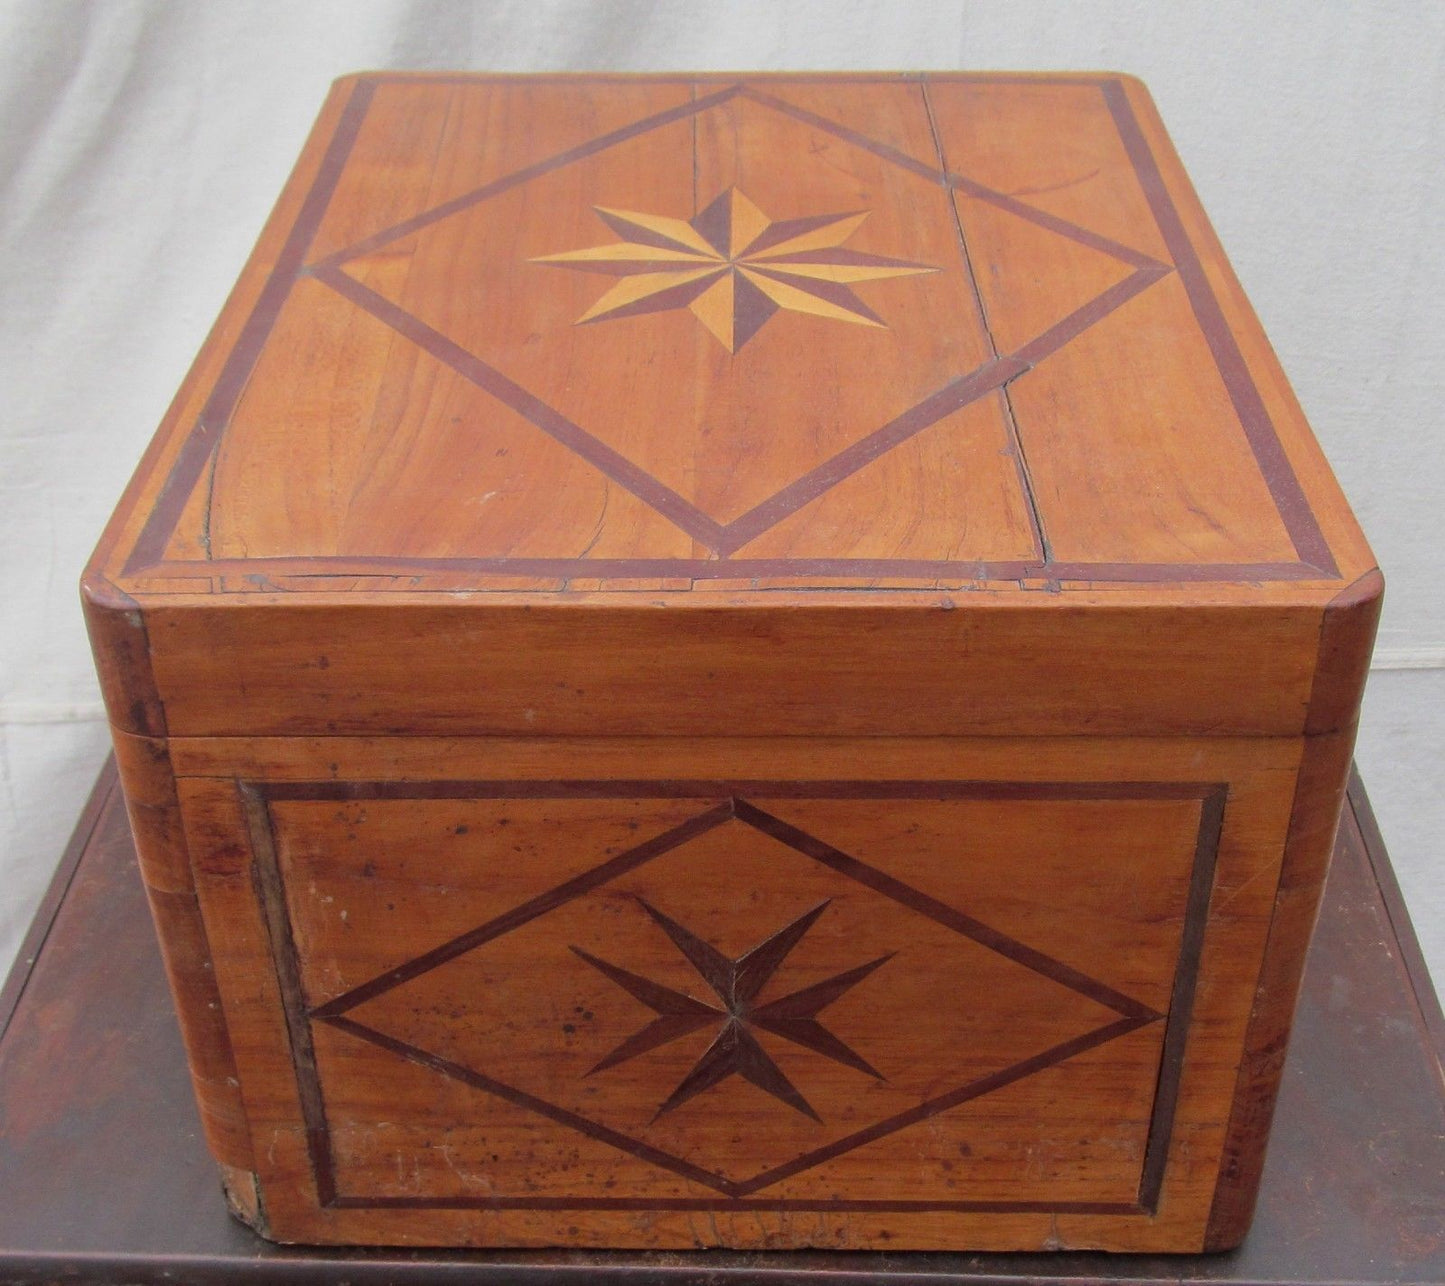 LARGE 19TH CENTURY FINELY INLAID SAILORS BOX WITH MARINERS STAR